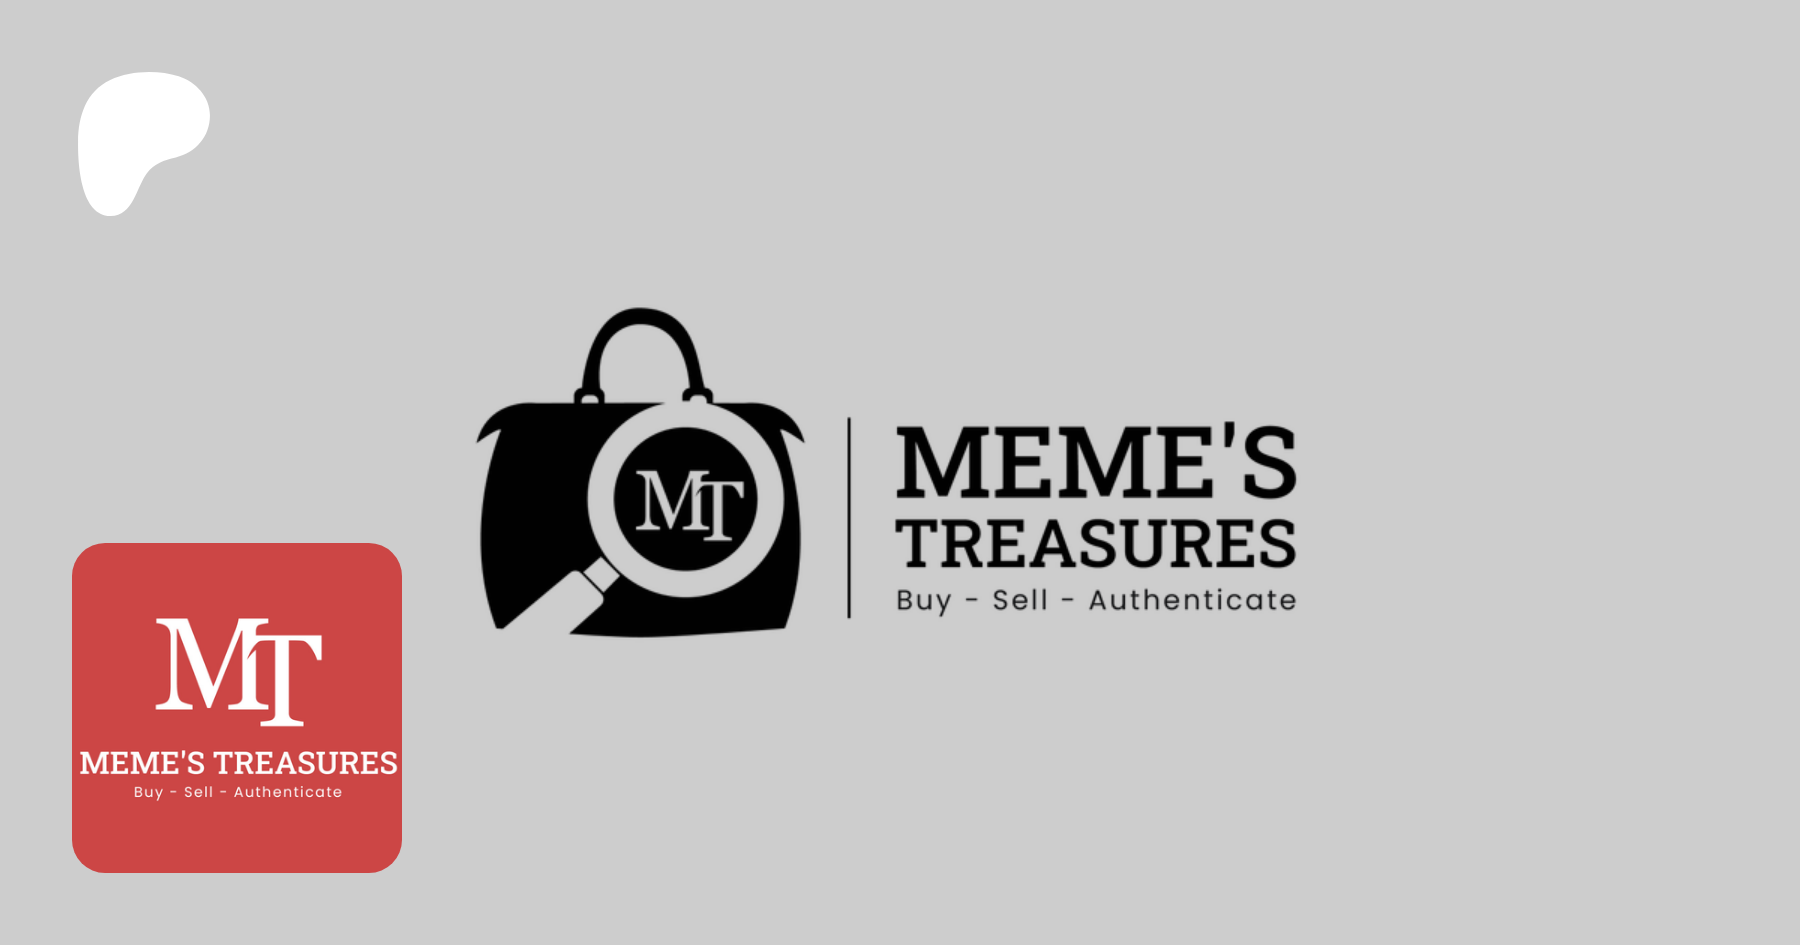 Memes Treasures Sales and Authentication Service - Just in! Eva